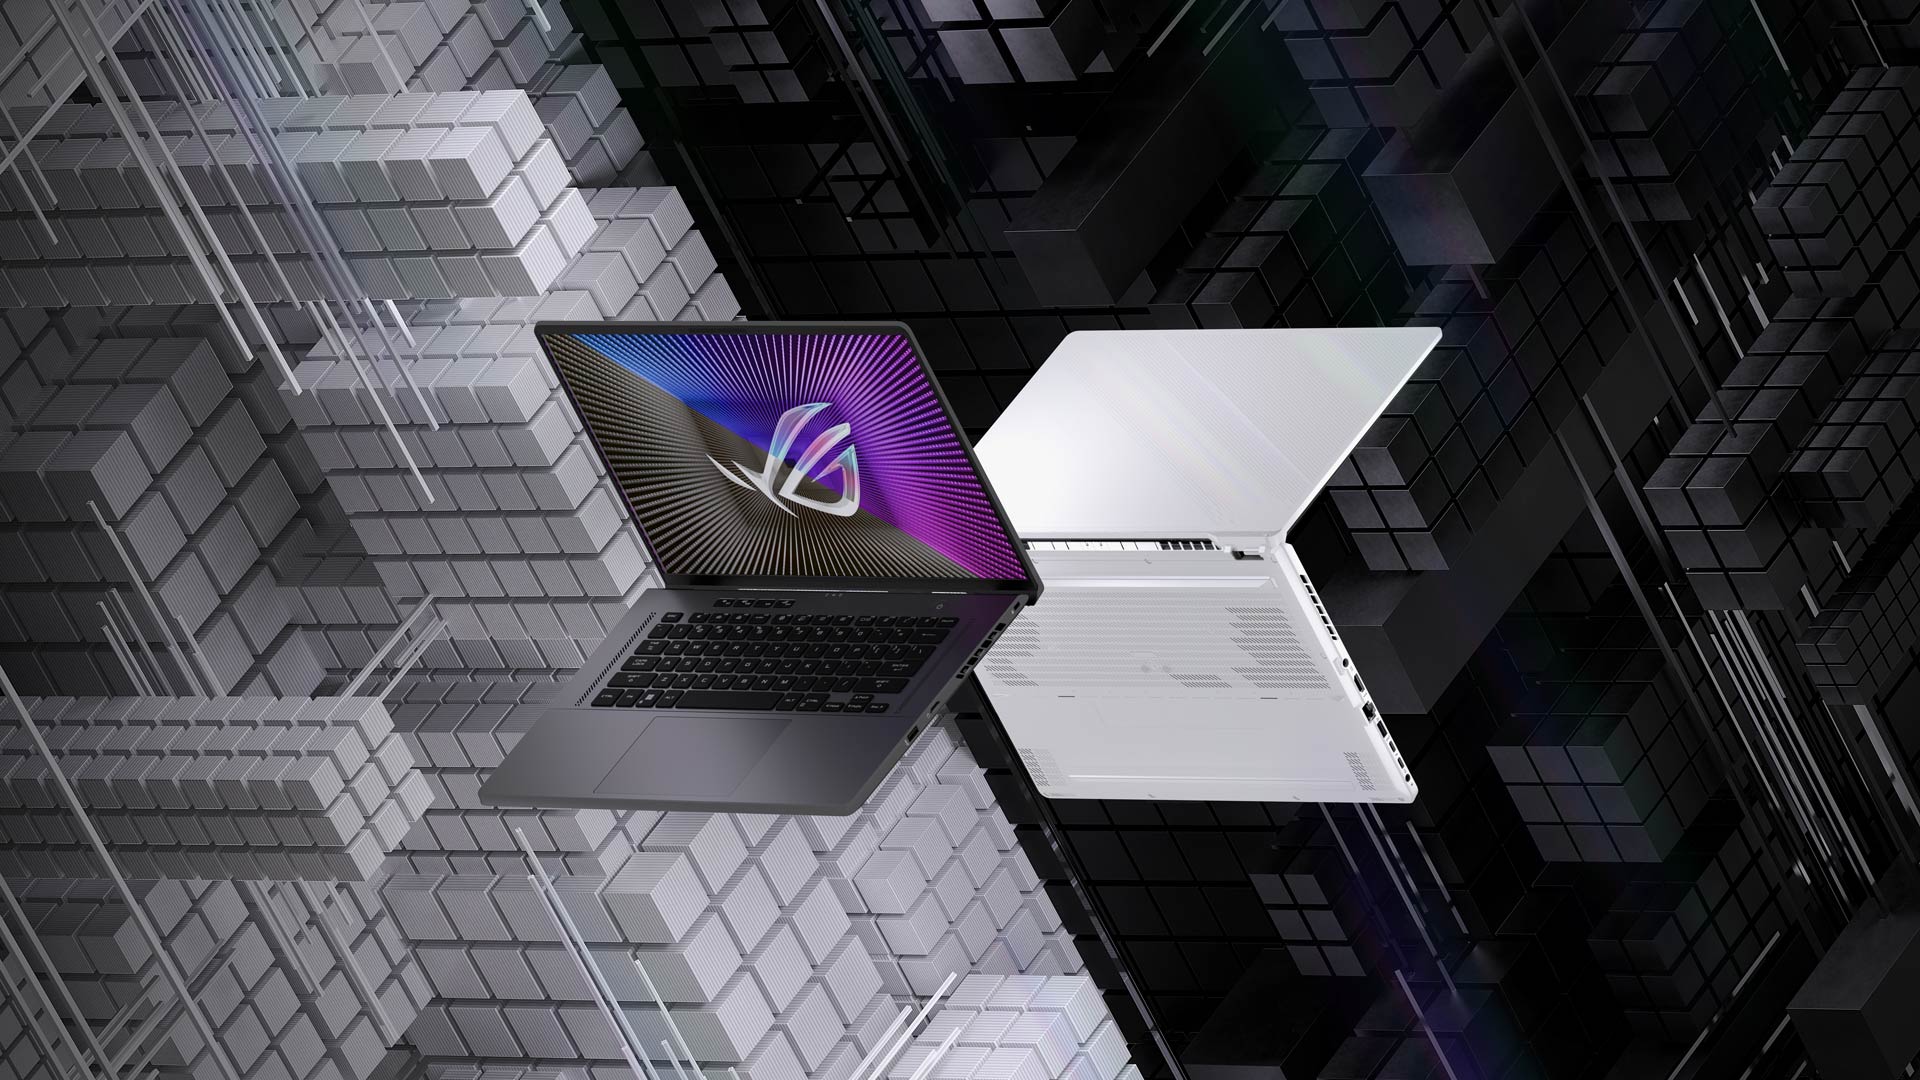 Asus unveiled the stunning ROG Zephyrus gaming laptops at CES 2023